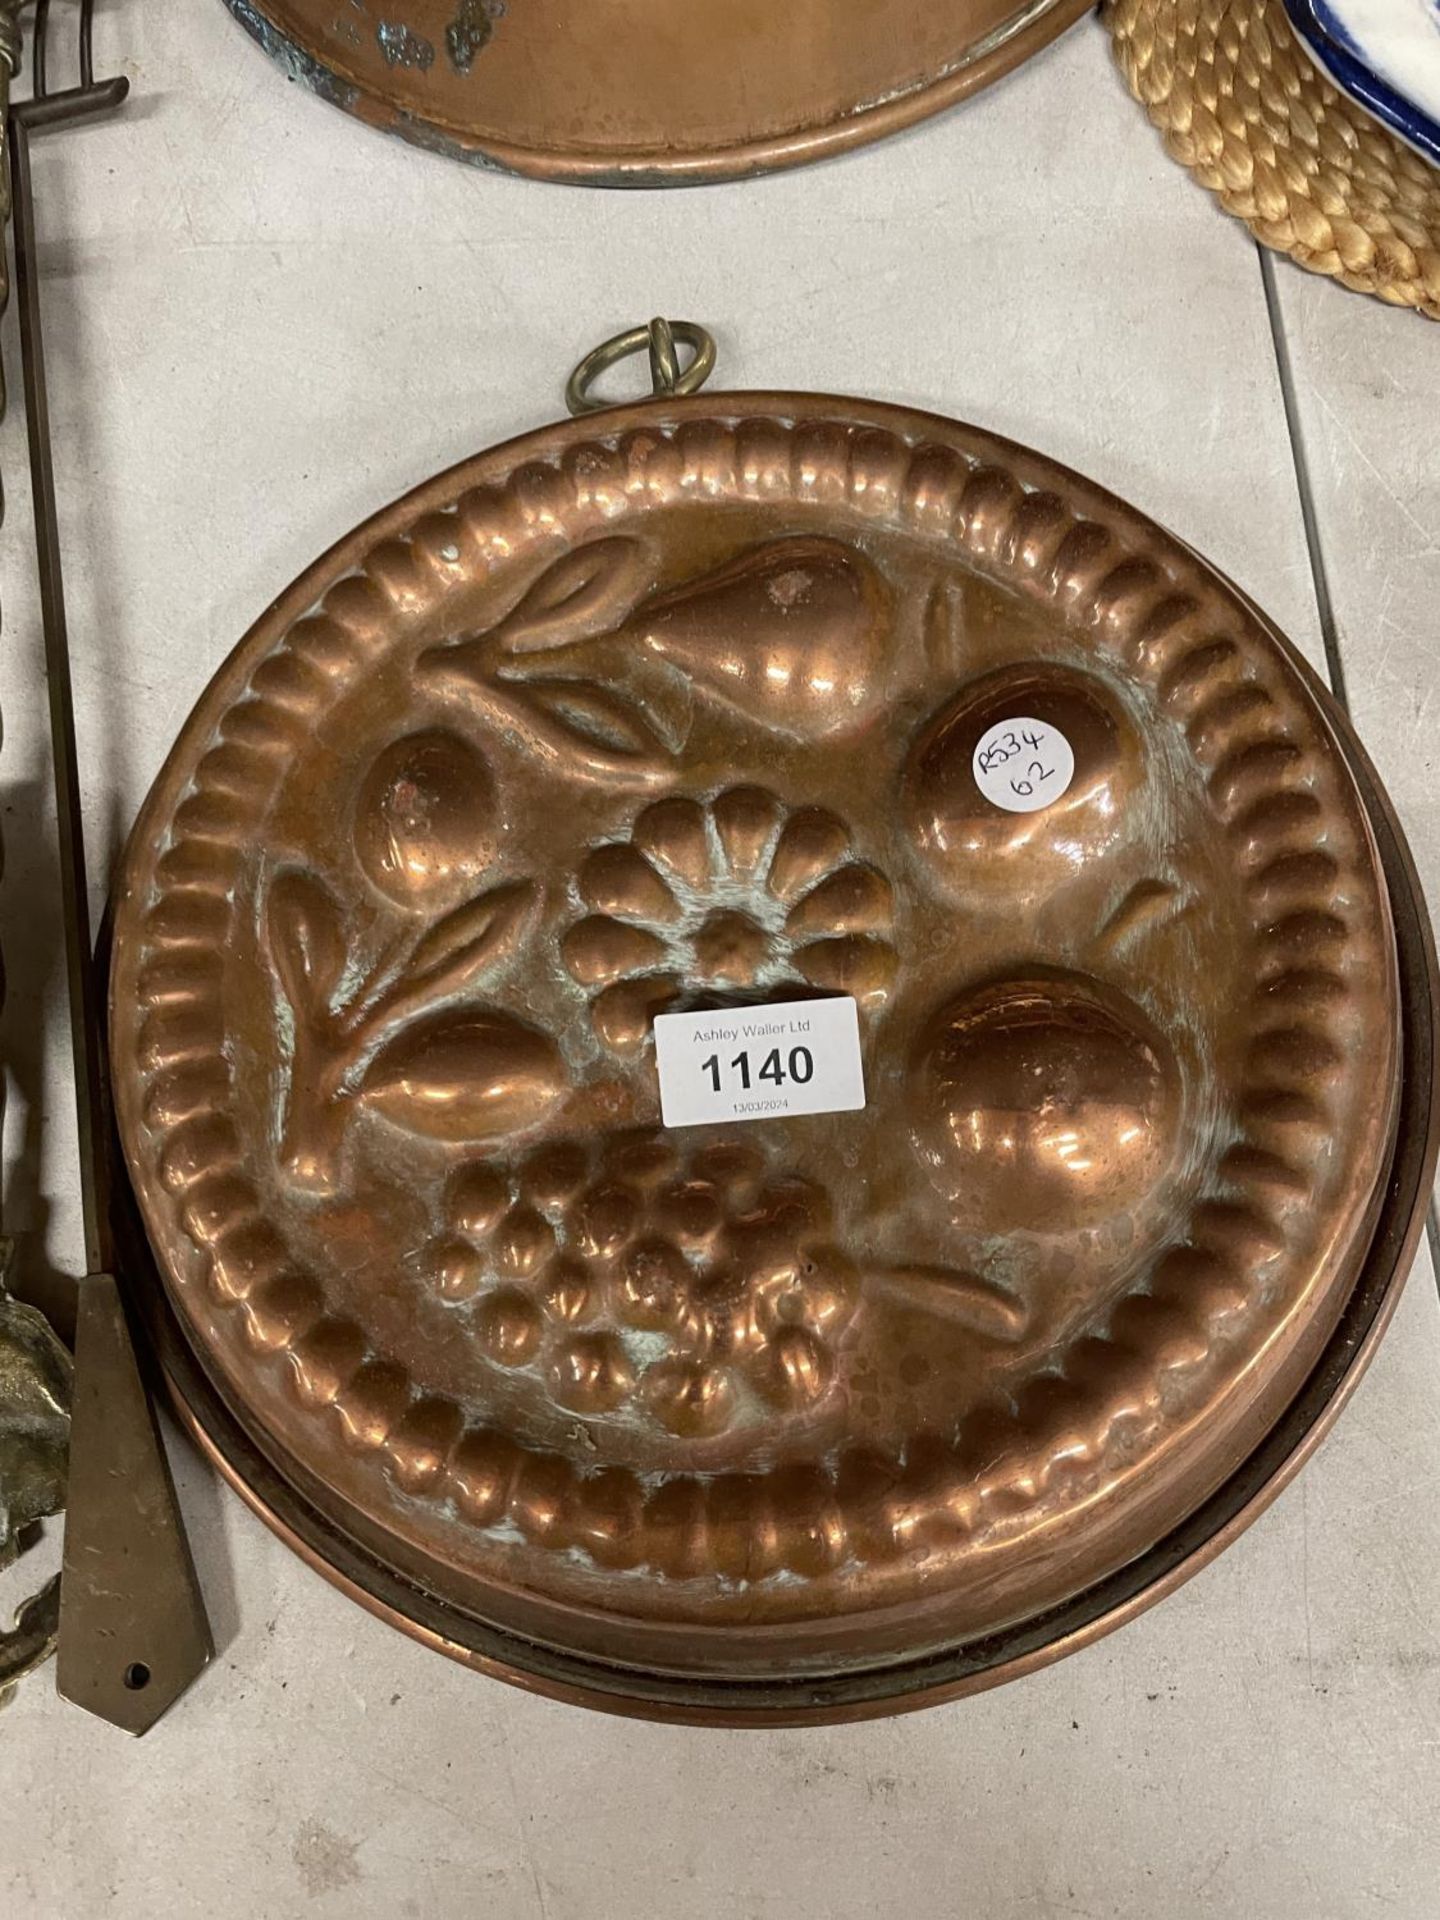 TWO LARGE, ANTIQUE, DECORATIVE FRENCH COPPER FRUIT TART MOULDS - Image 3 of 4